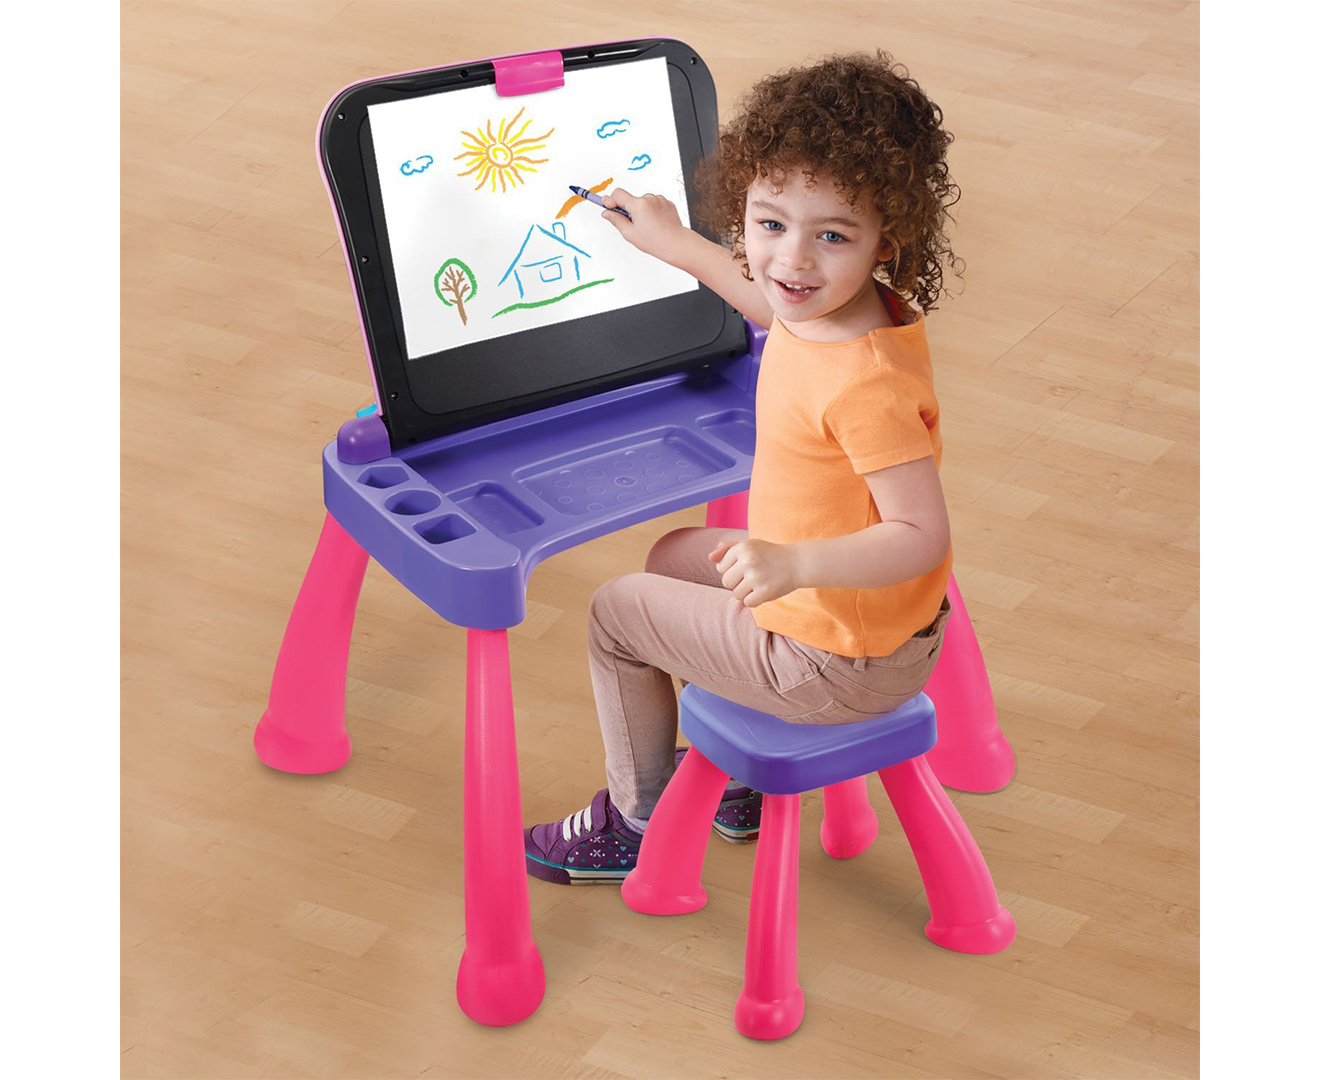 vtech touch and learn activity desk target